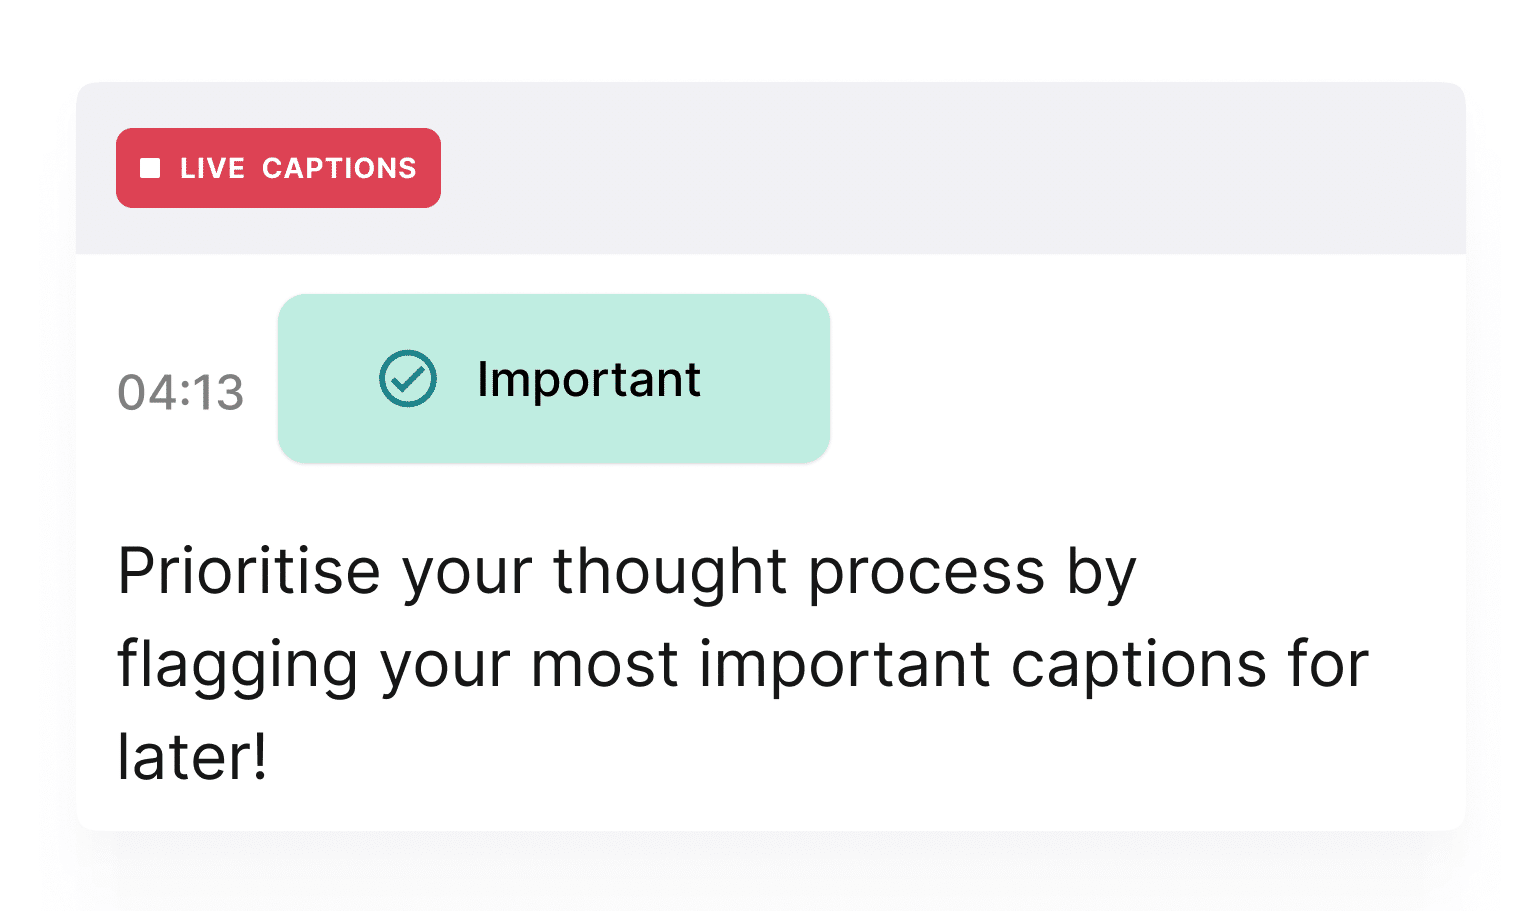 The Caption.Ed interface with the red 'Live Captions' signal button at the top, and notes marked as important. The notes state: Prioritise your thought process by flagging your most important captions.